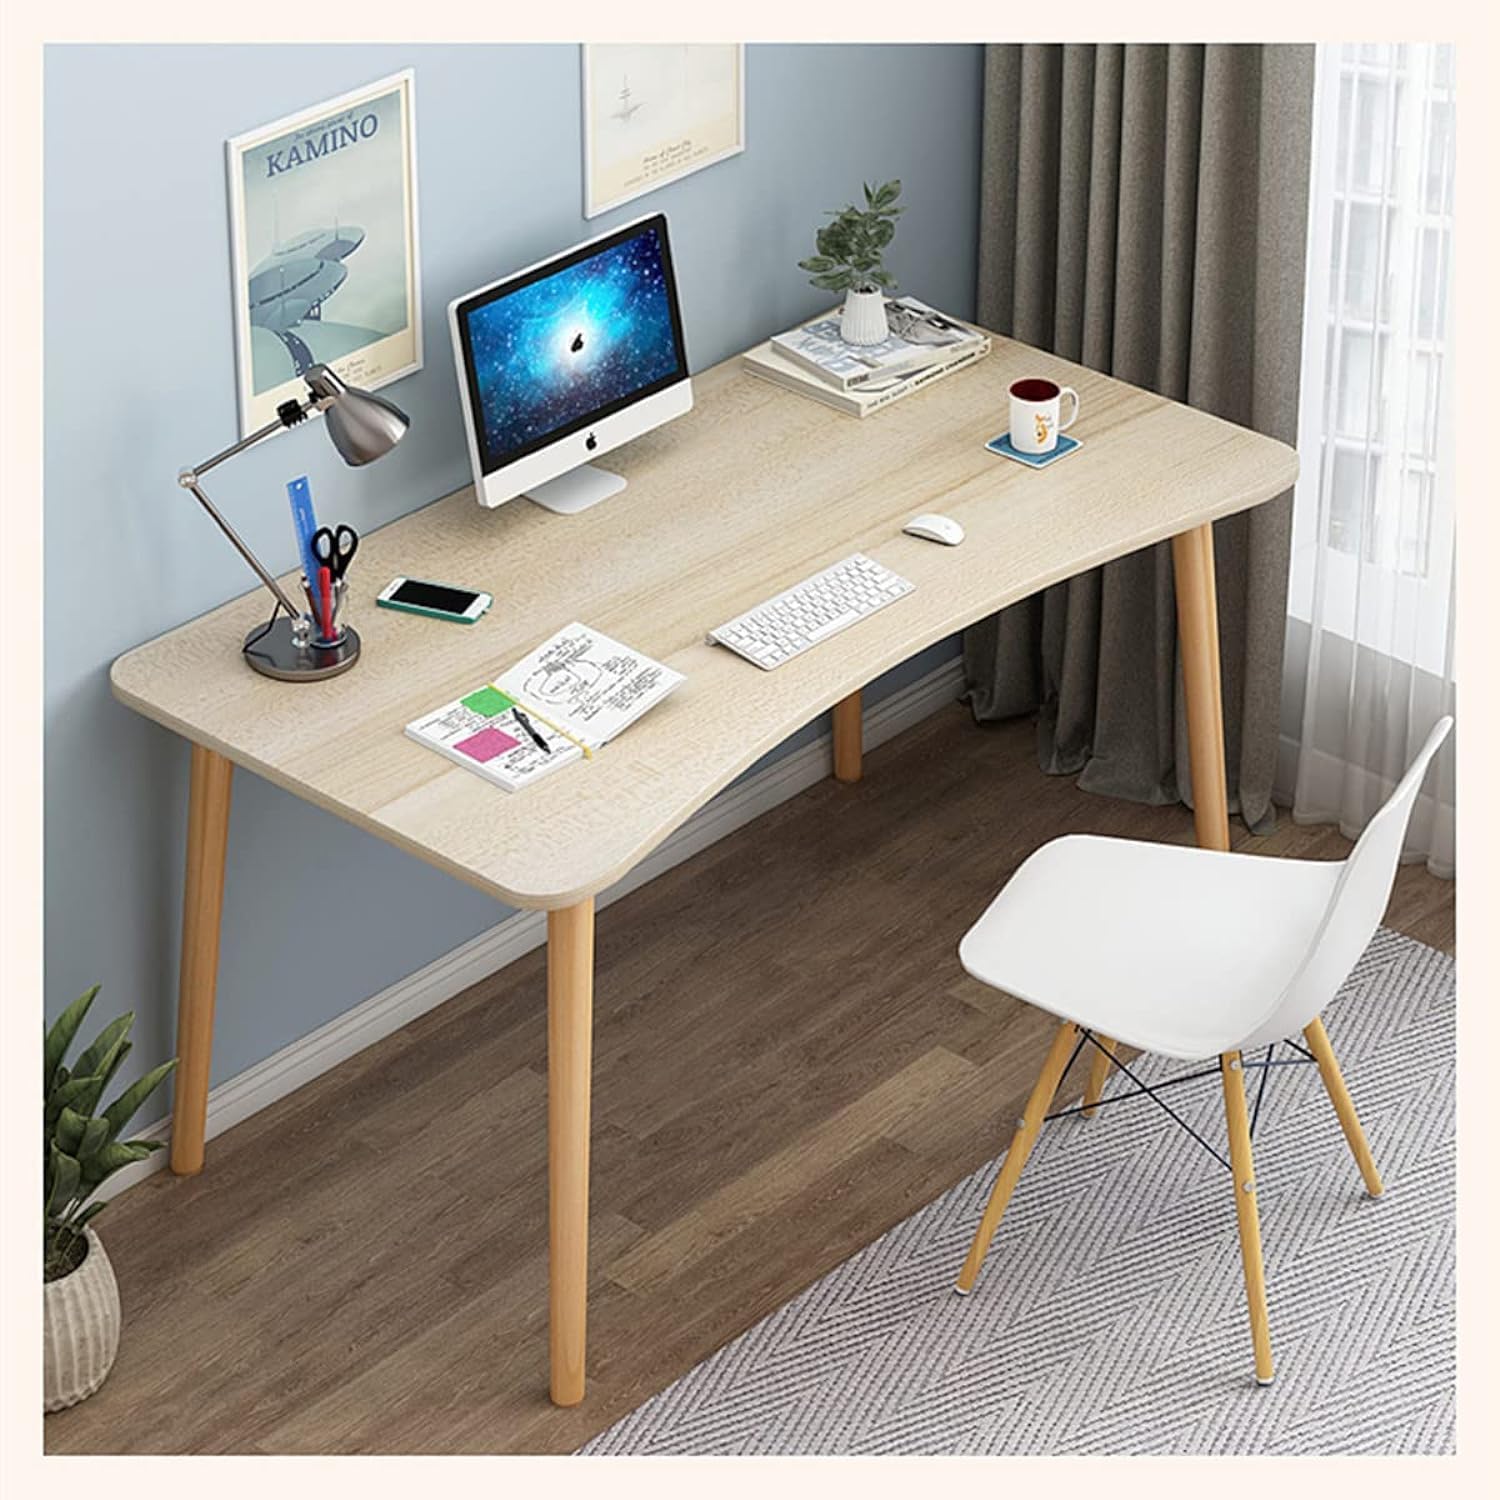 Computer Desk for Home Office Workbench Desk, Shop online home decor, furniture, sofa, bed sheet, baby product, pet products, lamp, lights, deco items, decoration, cute home decor, best online shopping, uae, dubai, sharjah, home furniture cheap ssolution,